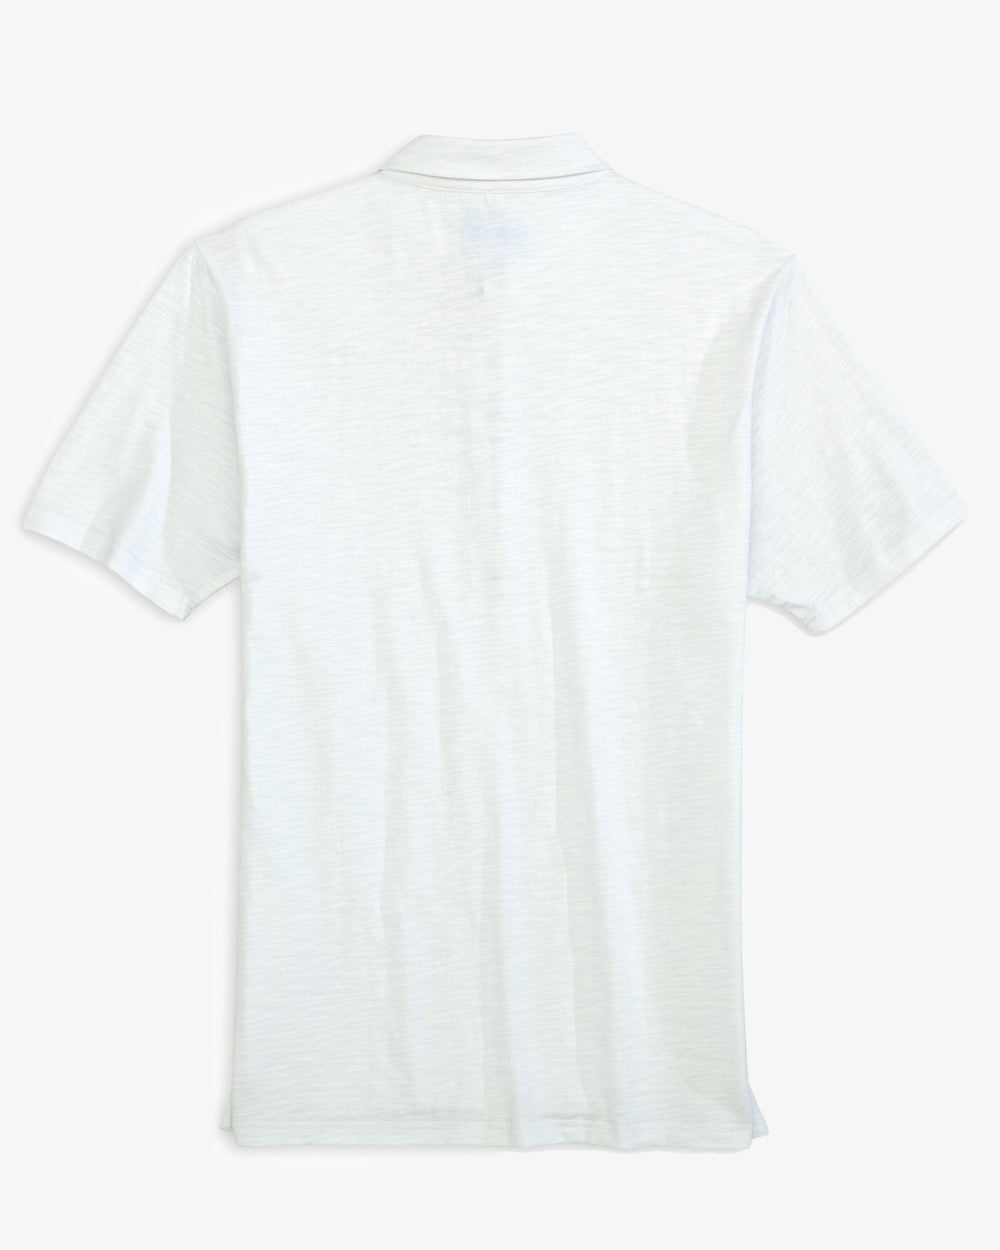 The back of the Men's Sun Farer Polo Shirt by Southern Tide - Classic White